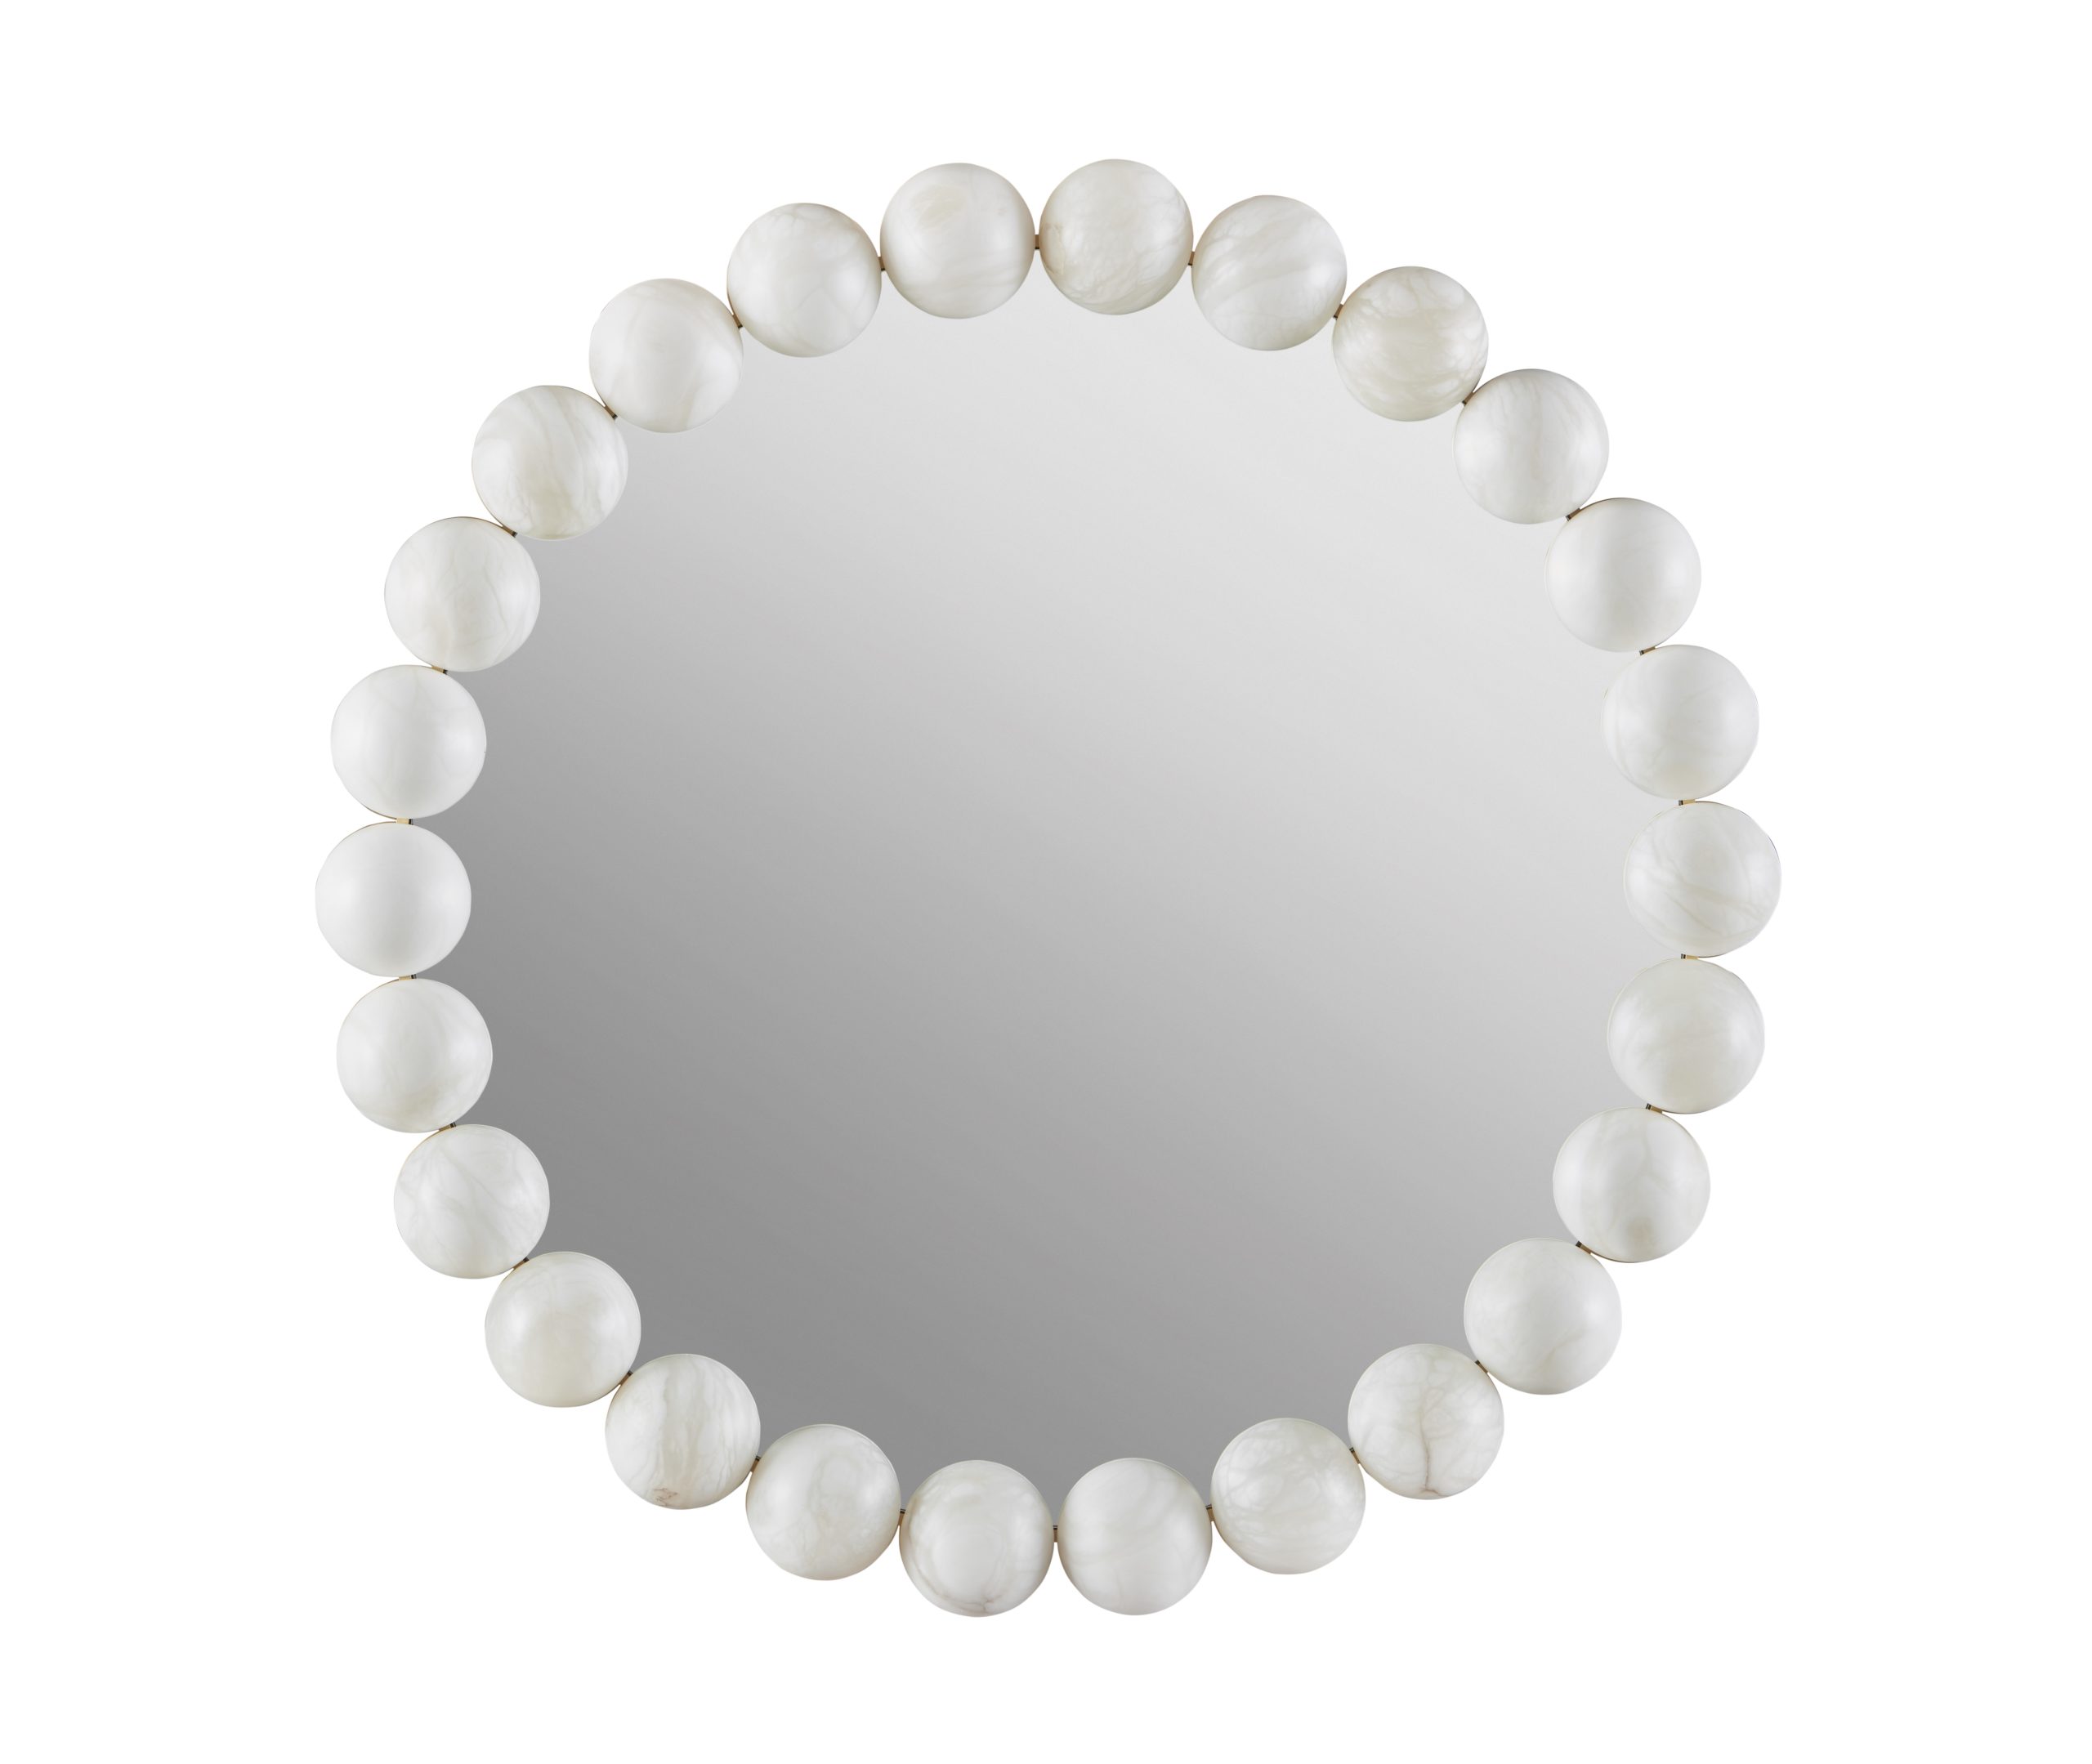 Baker_products_pearl_mirror_BAA3212_FRONT-scaled-1